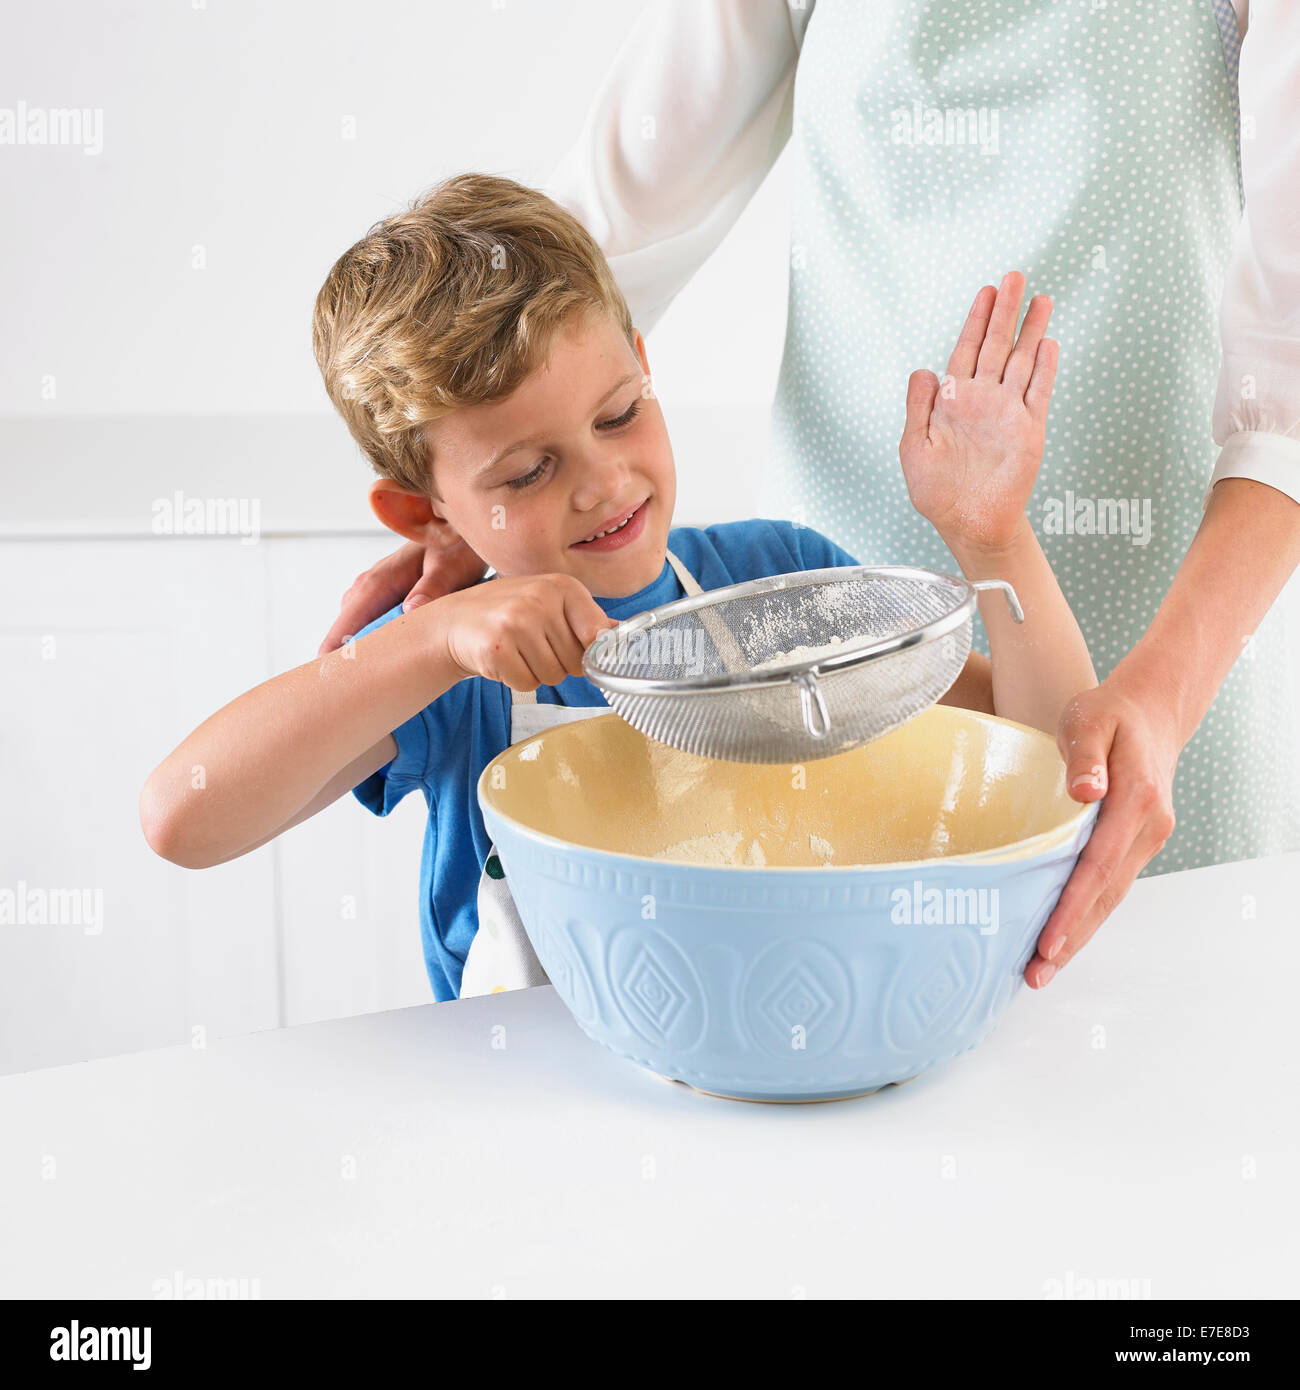 Young boy sifting flour into mixing bowl Stock Photo